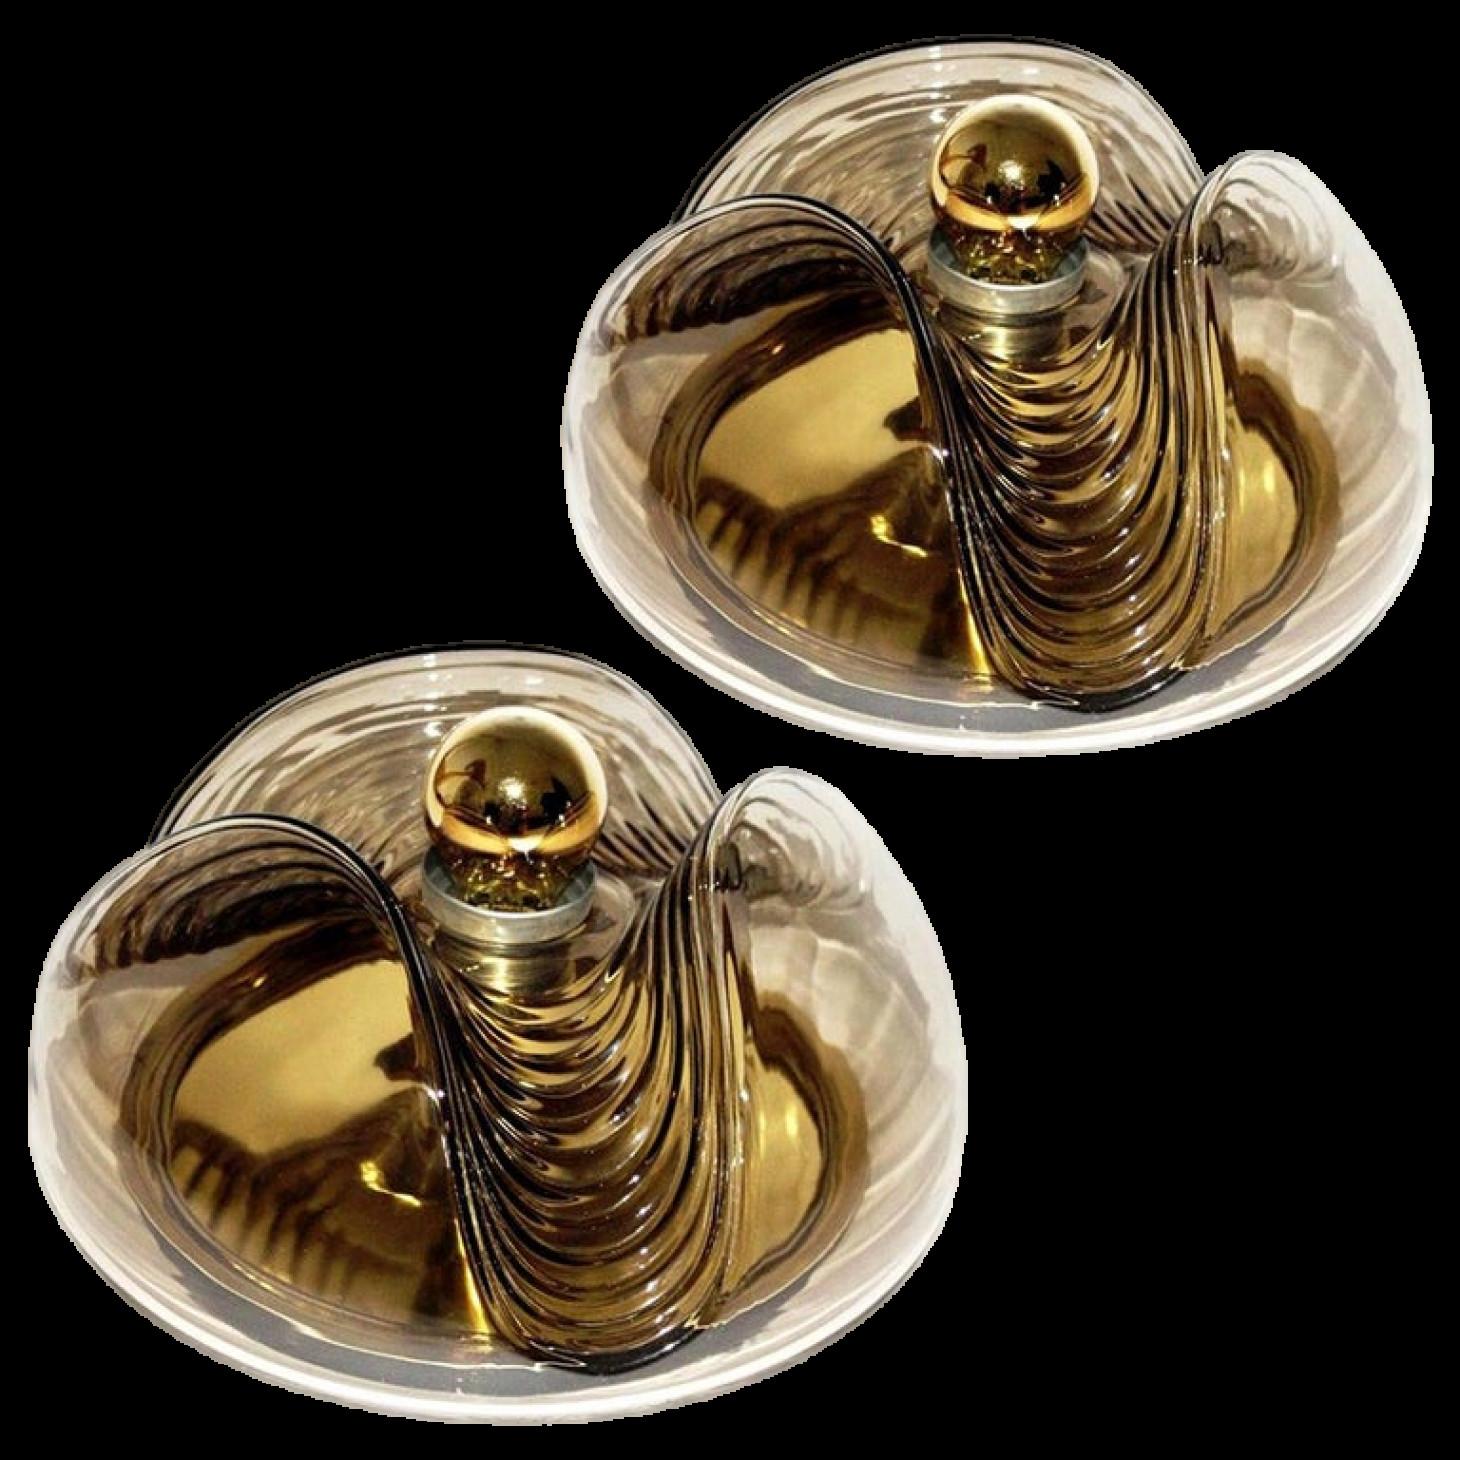 Midcentury flushmount wall lights or sconces designed by Koch & Lowy for Peill & Putzler in the 1970s. Featuring a smoked glass globe shade with a waved/ribbed molded bubble form, casting a stunning rippled light across a wall or ceiling.

Each